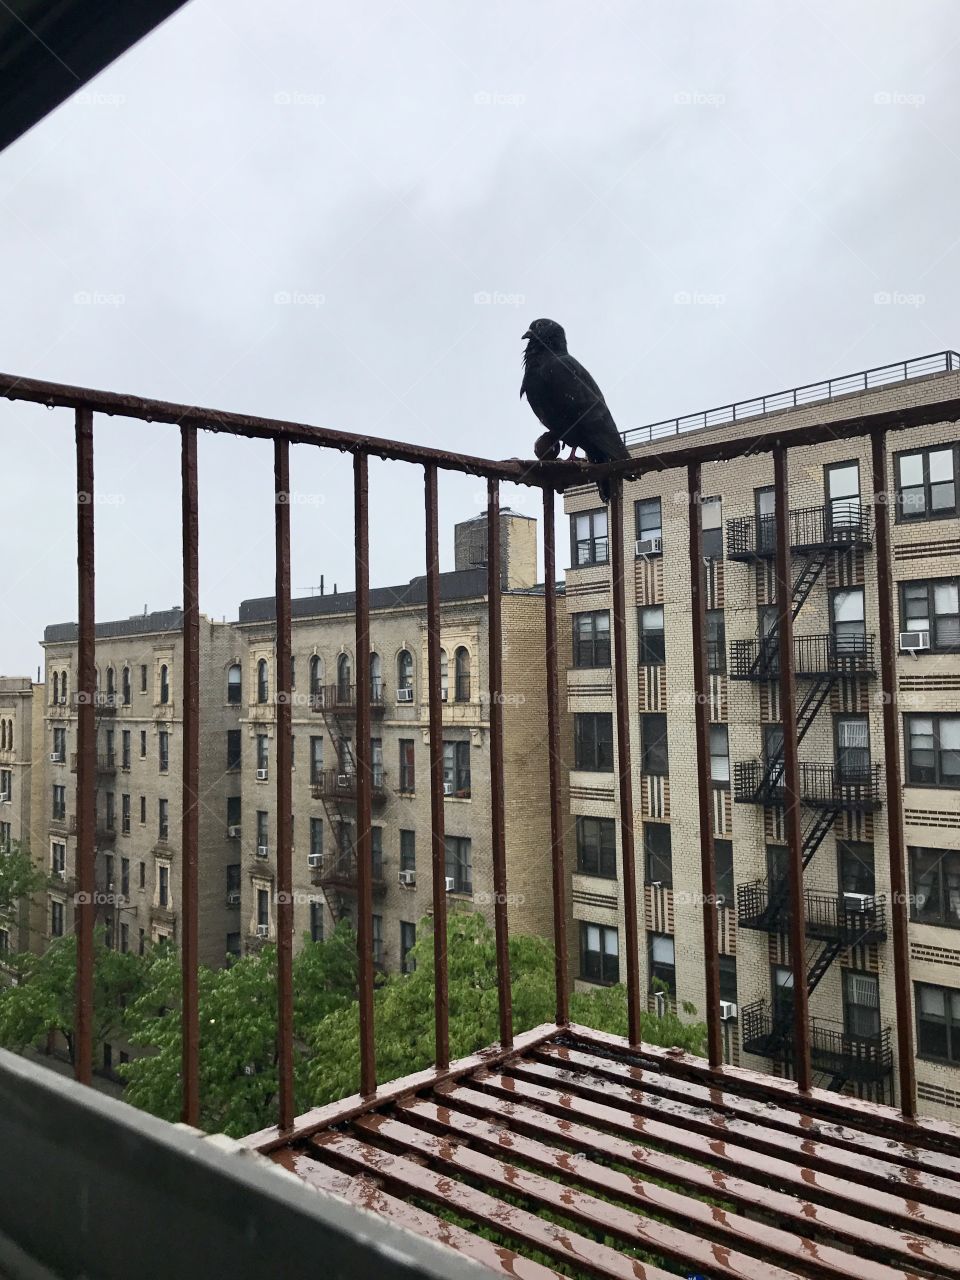 Rainy day fire escape pigeon in Washington Heights, New York, USA